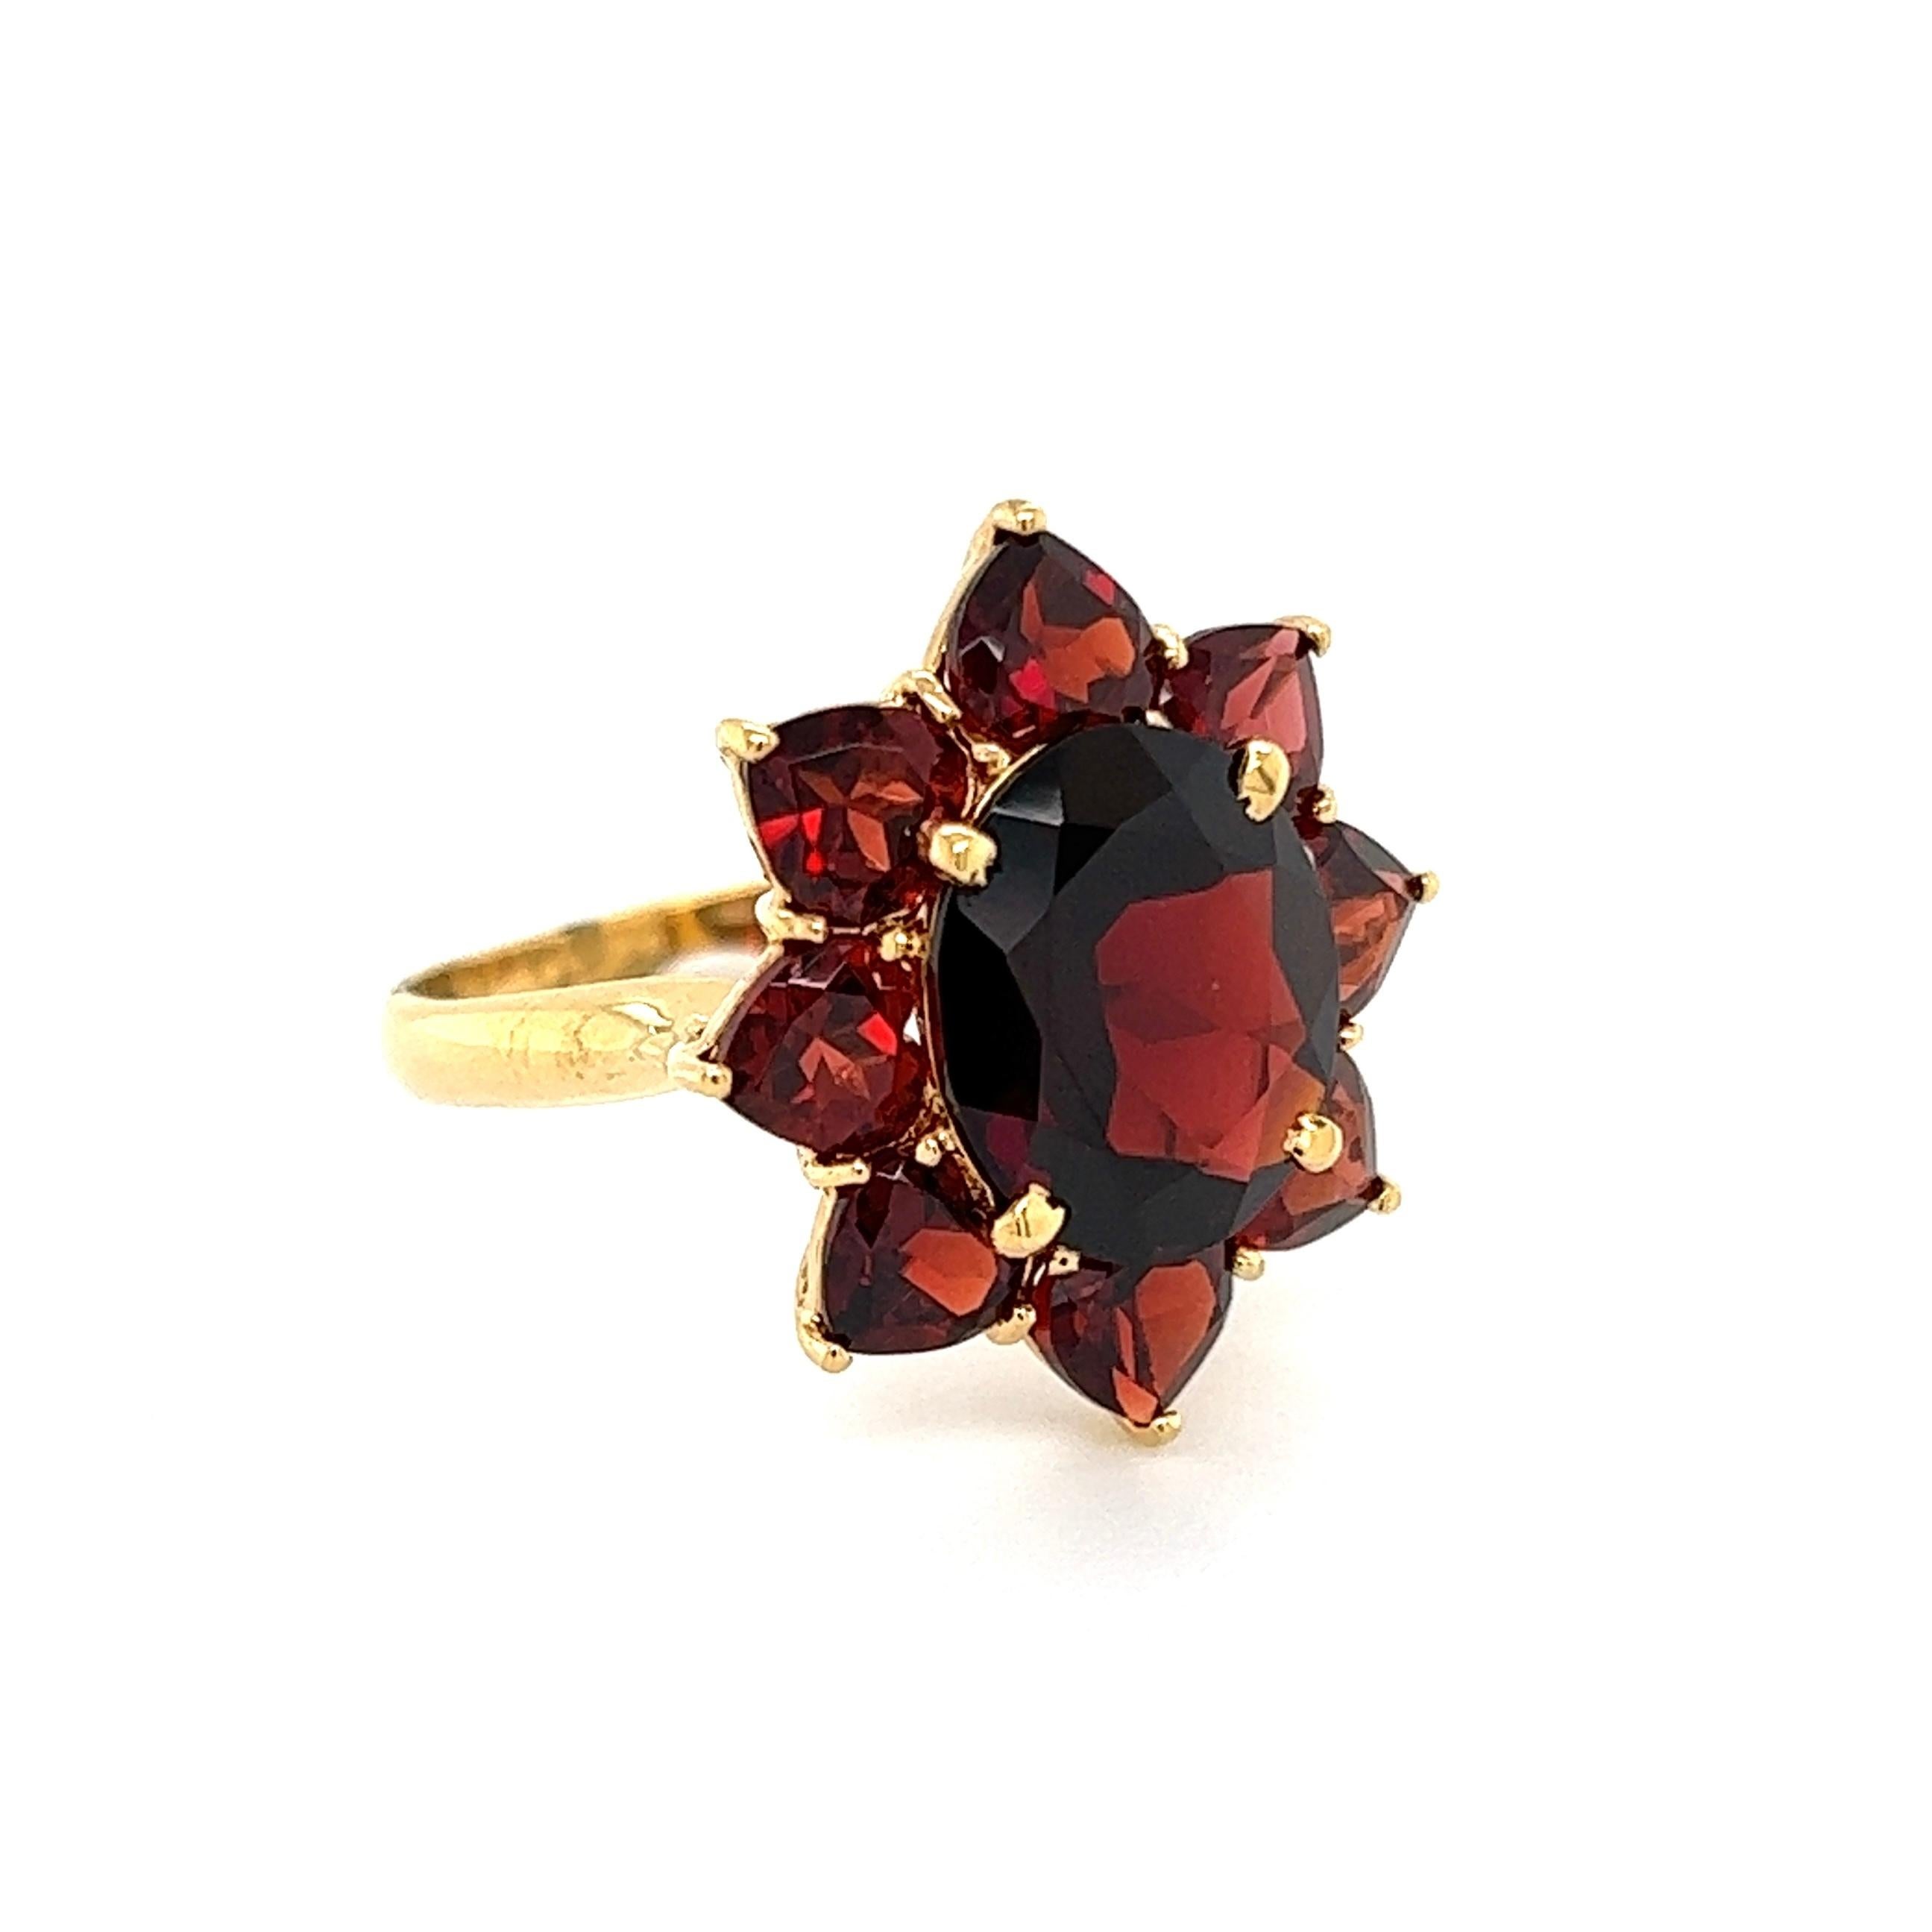 Beautiful Bohemian Garnet Cluster Ring, Hand set with weighing approx. 10.00tcw. The ring is Hand crafted in 18K Yellow Gold. Measuring approx. 1.12” L x 0.85” W x 0.92” H. Ring Size 10, we offer ring re-sizing. The ring is in excellent condition